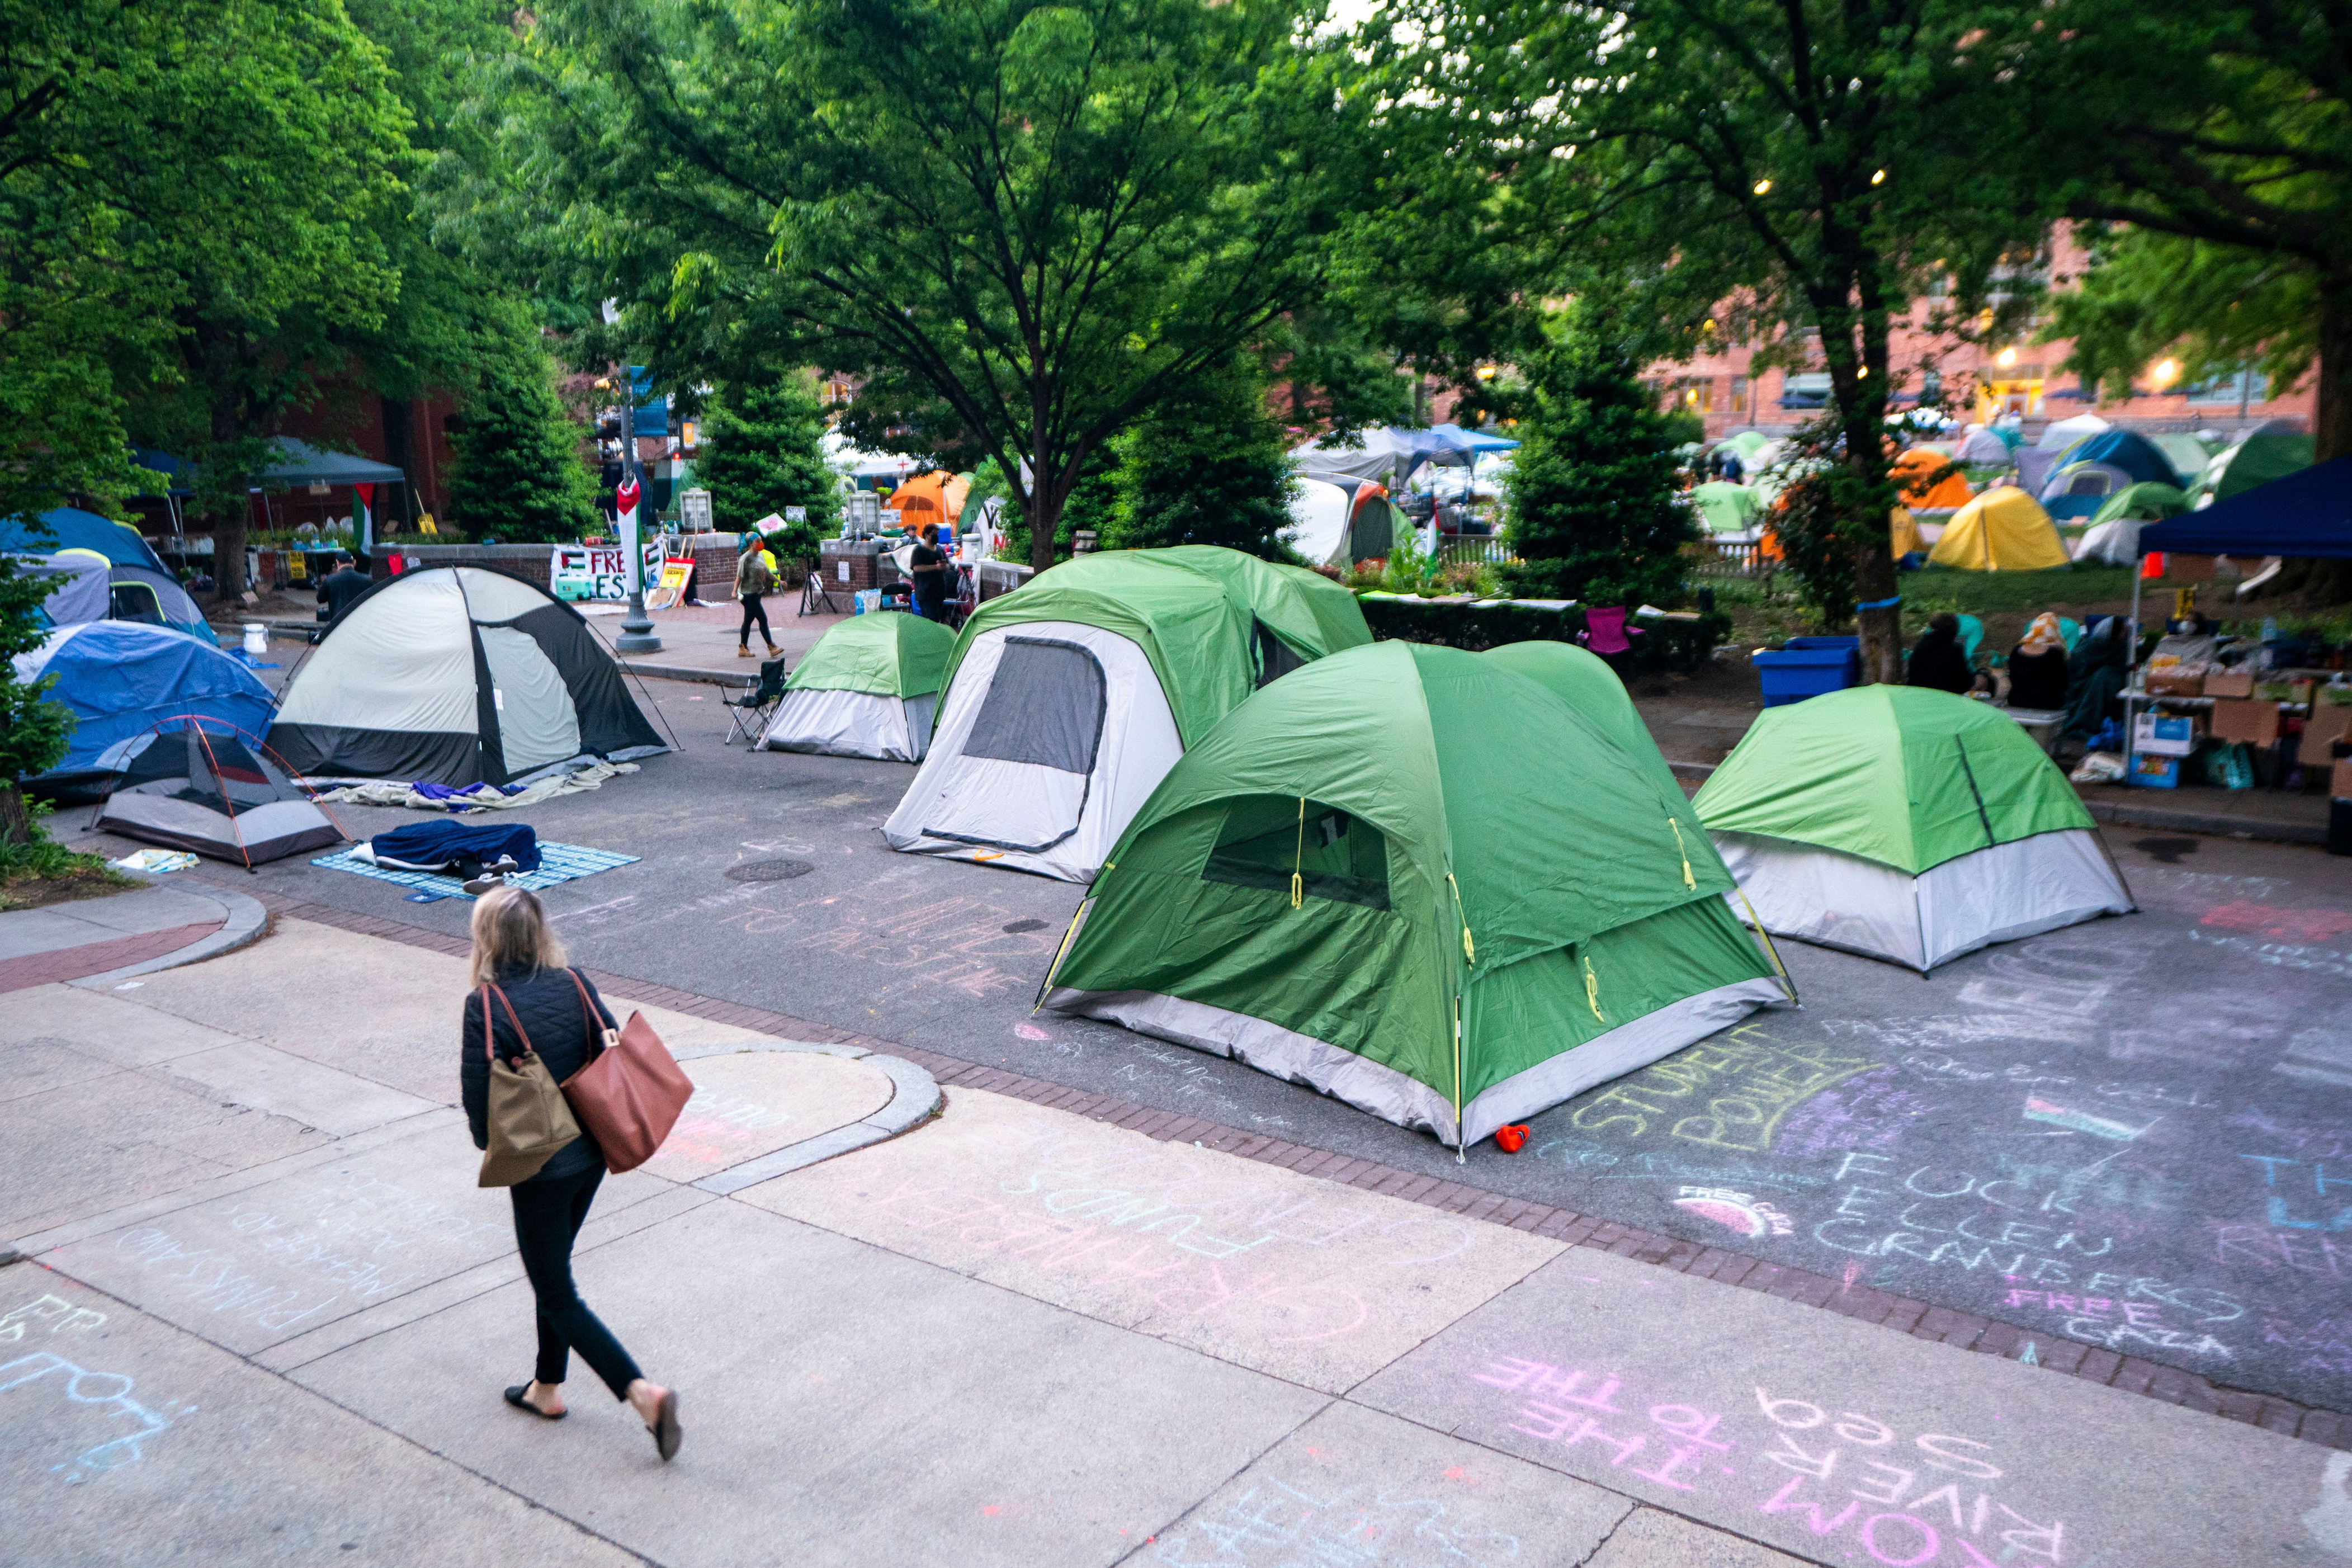 america’s tents are pitched on shameful truths